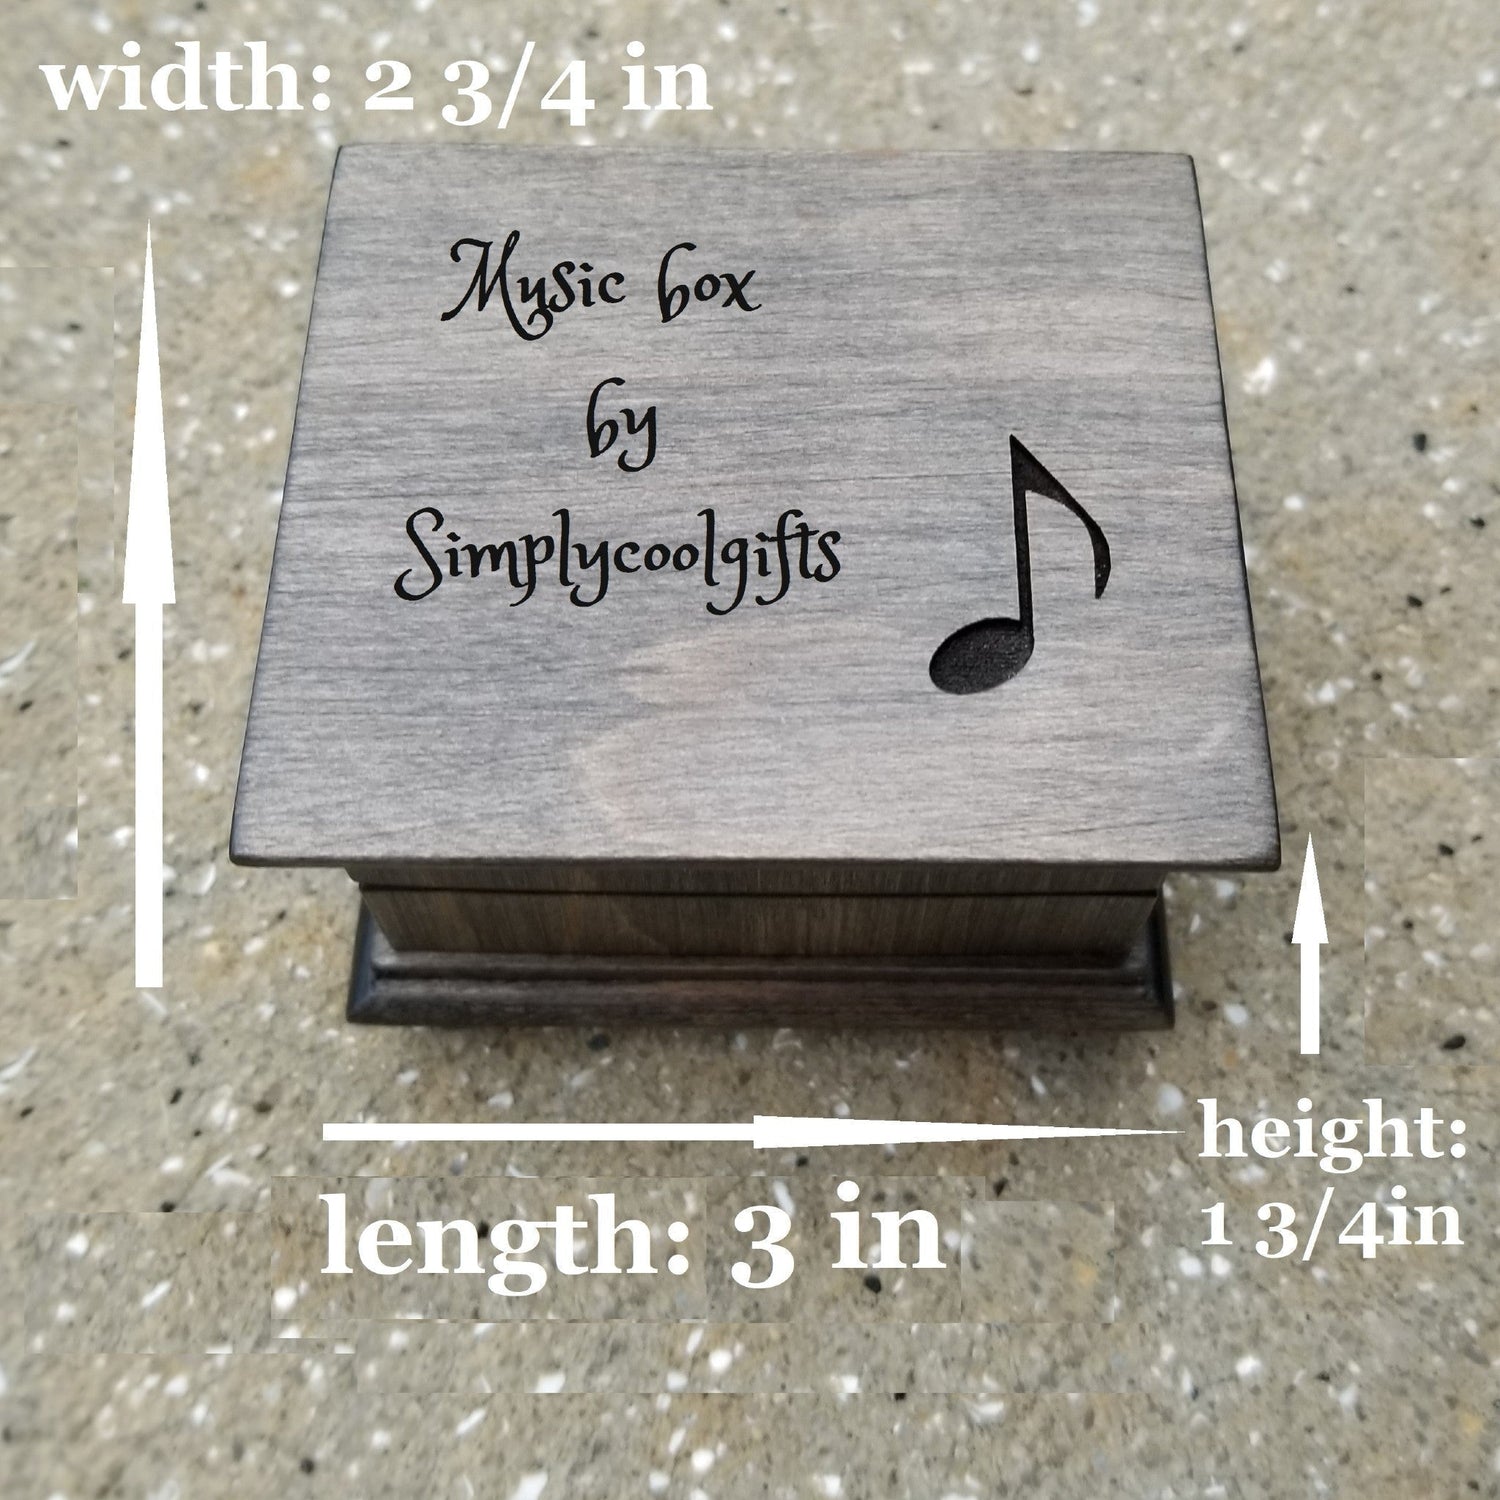 Music box shop with customized engraving, custom color and song choice, music box by Simply cool gifts